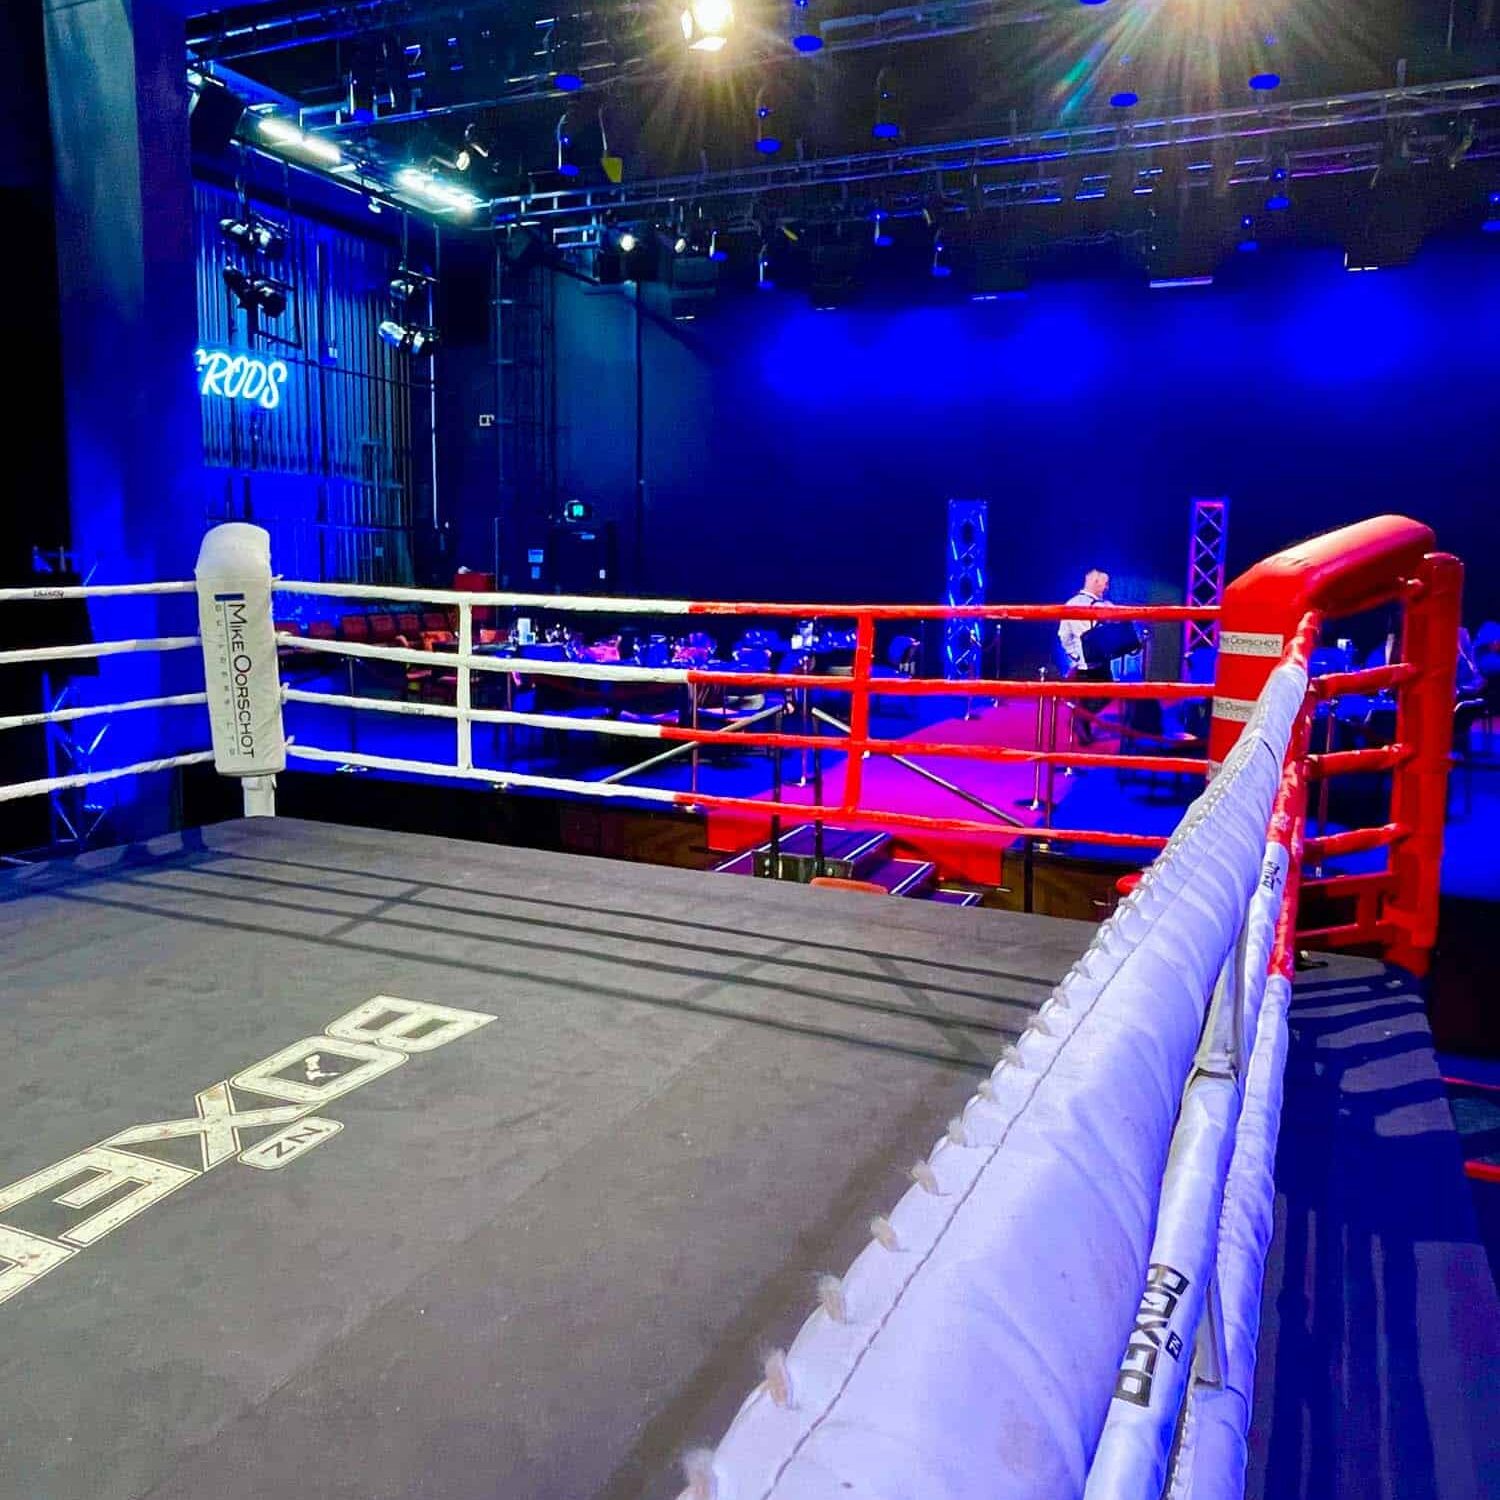 A boxing ring in an arena with blue lights.